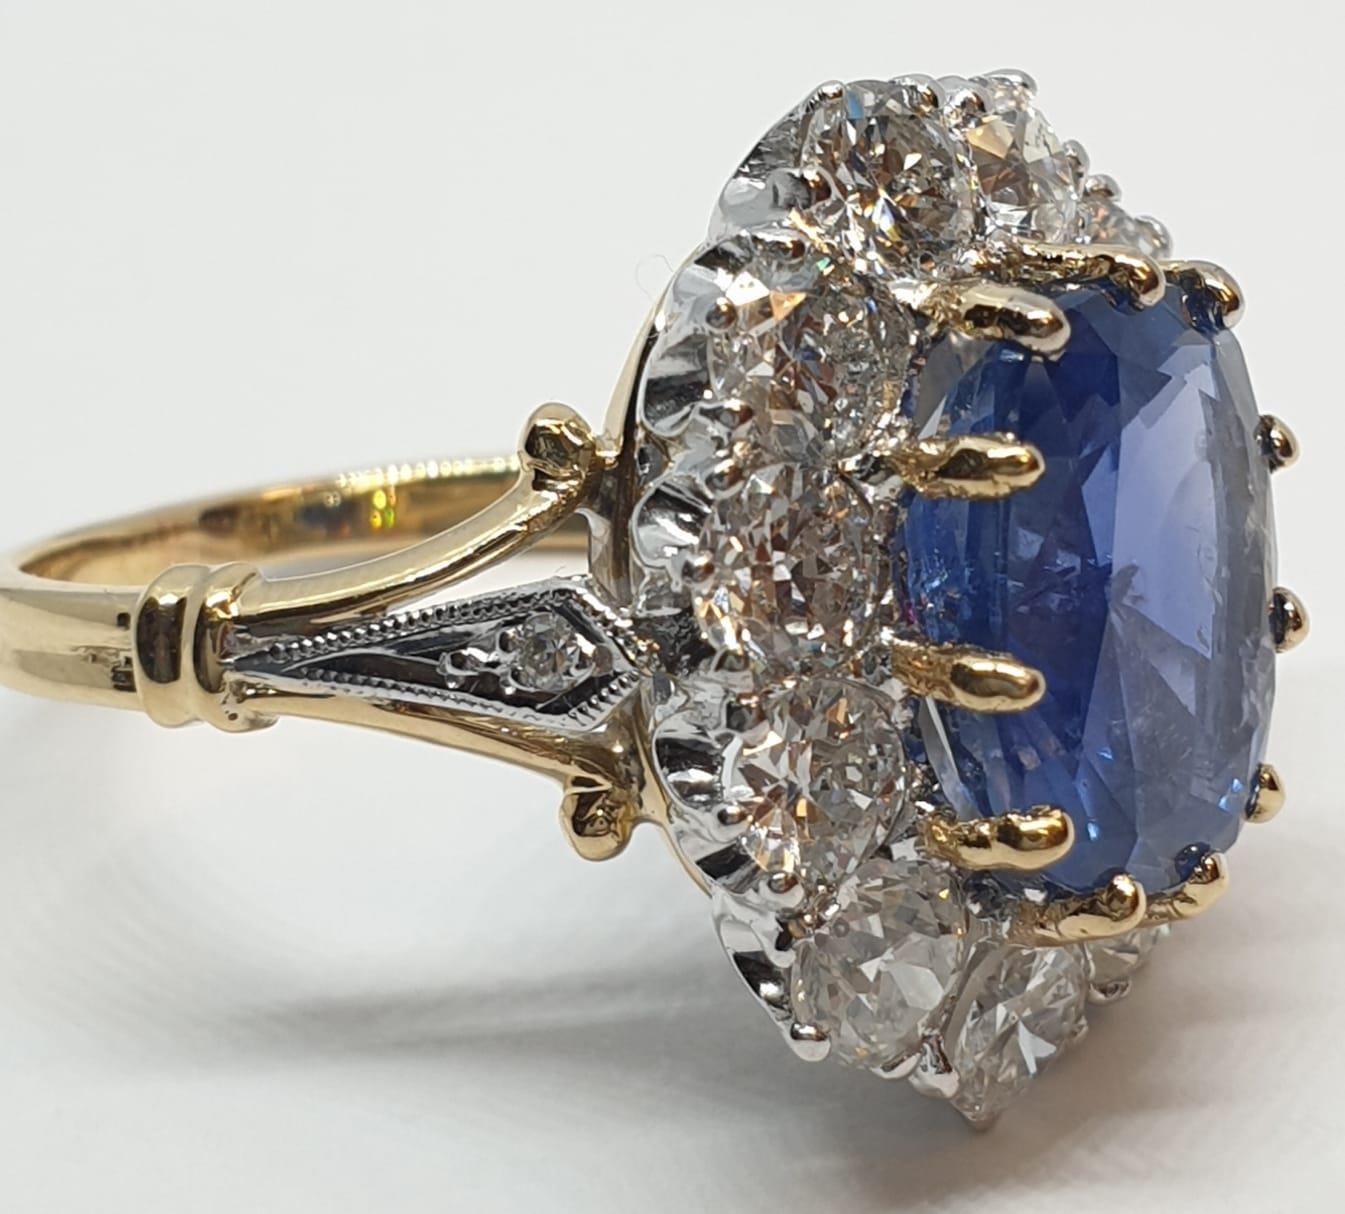 5.75ct sapphire ring set in white and yellow gold with over 3.5ct diamonds surrounding, weight 6. - Image 10 of 12